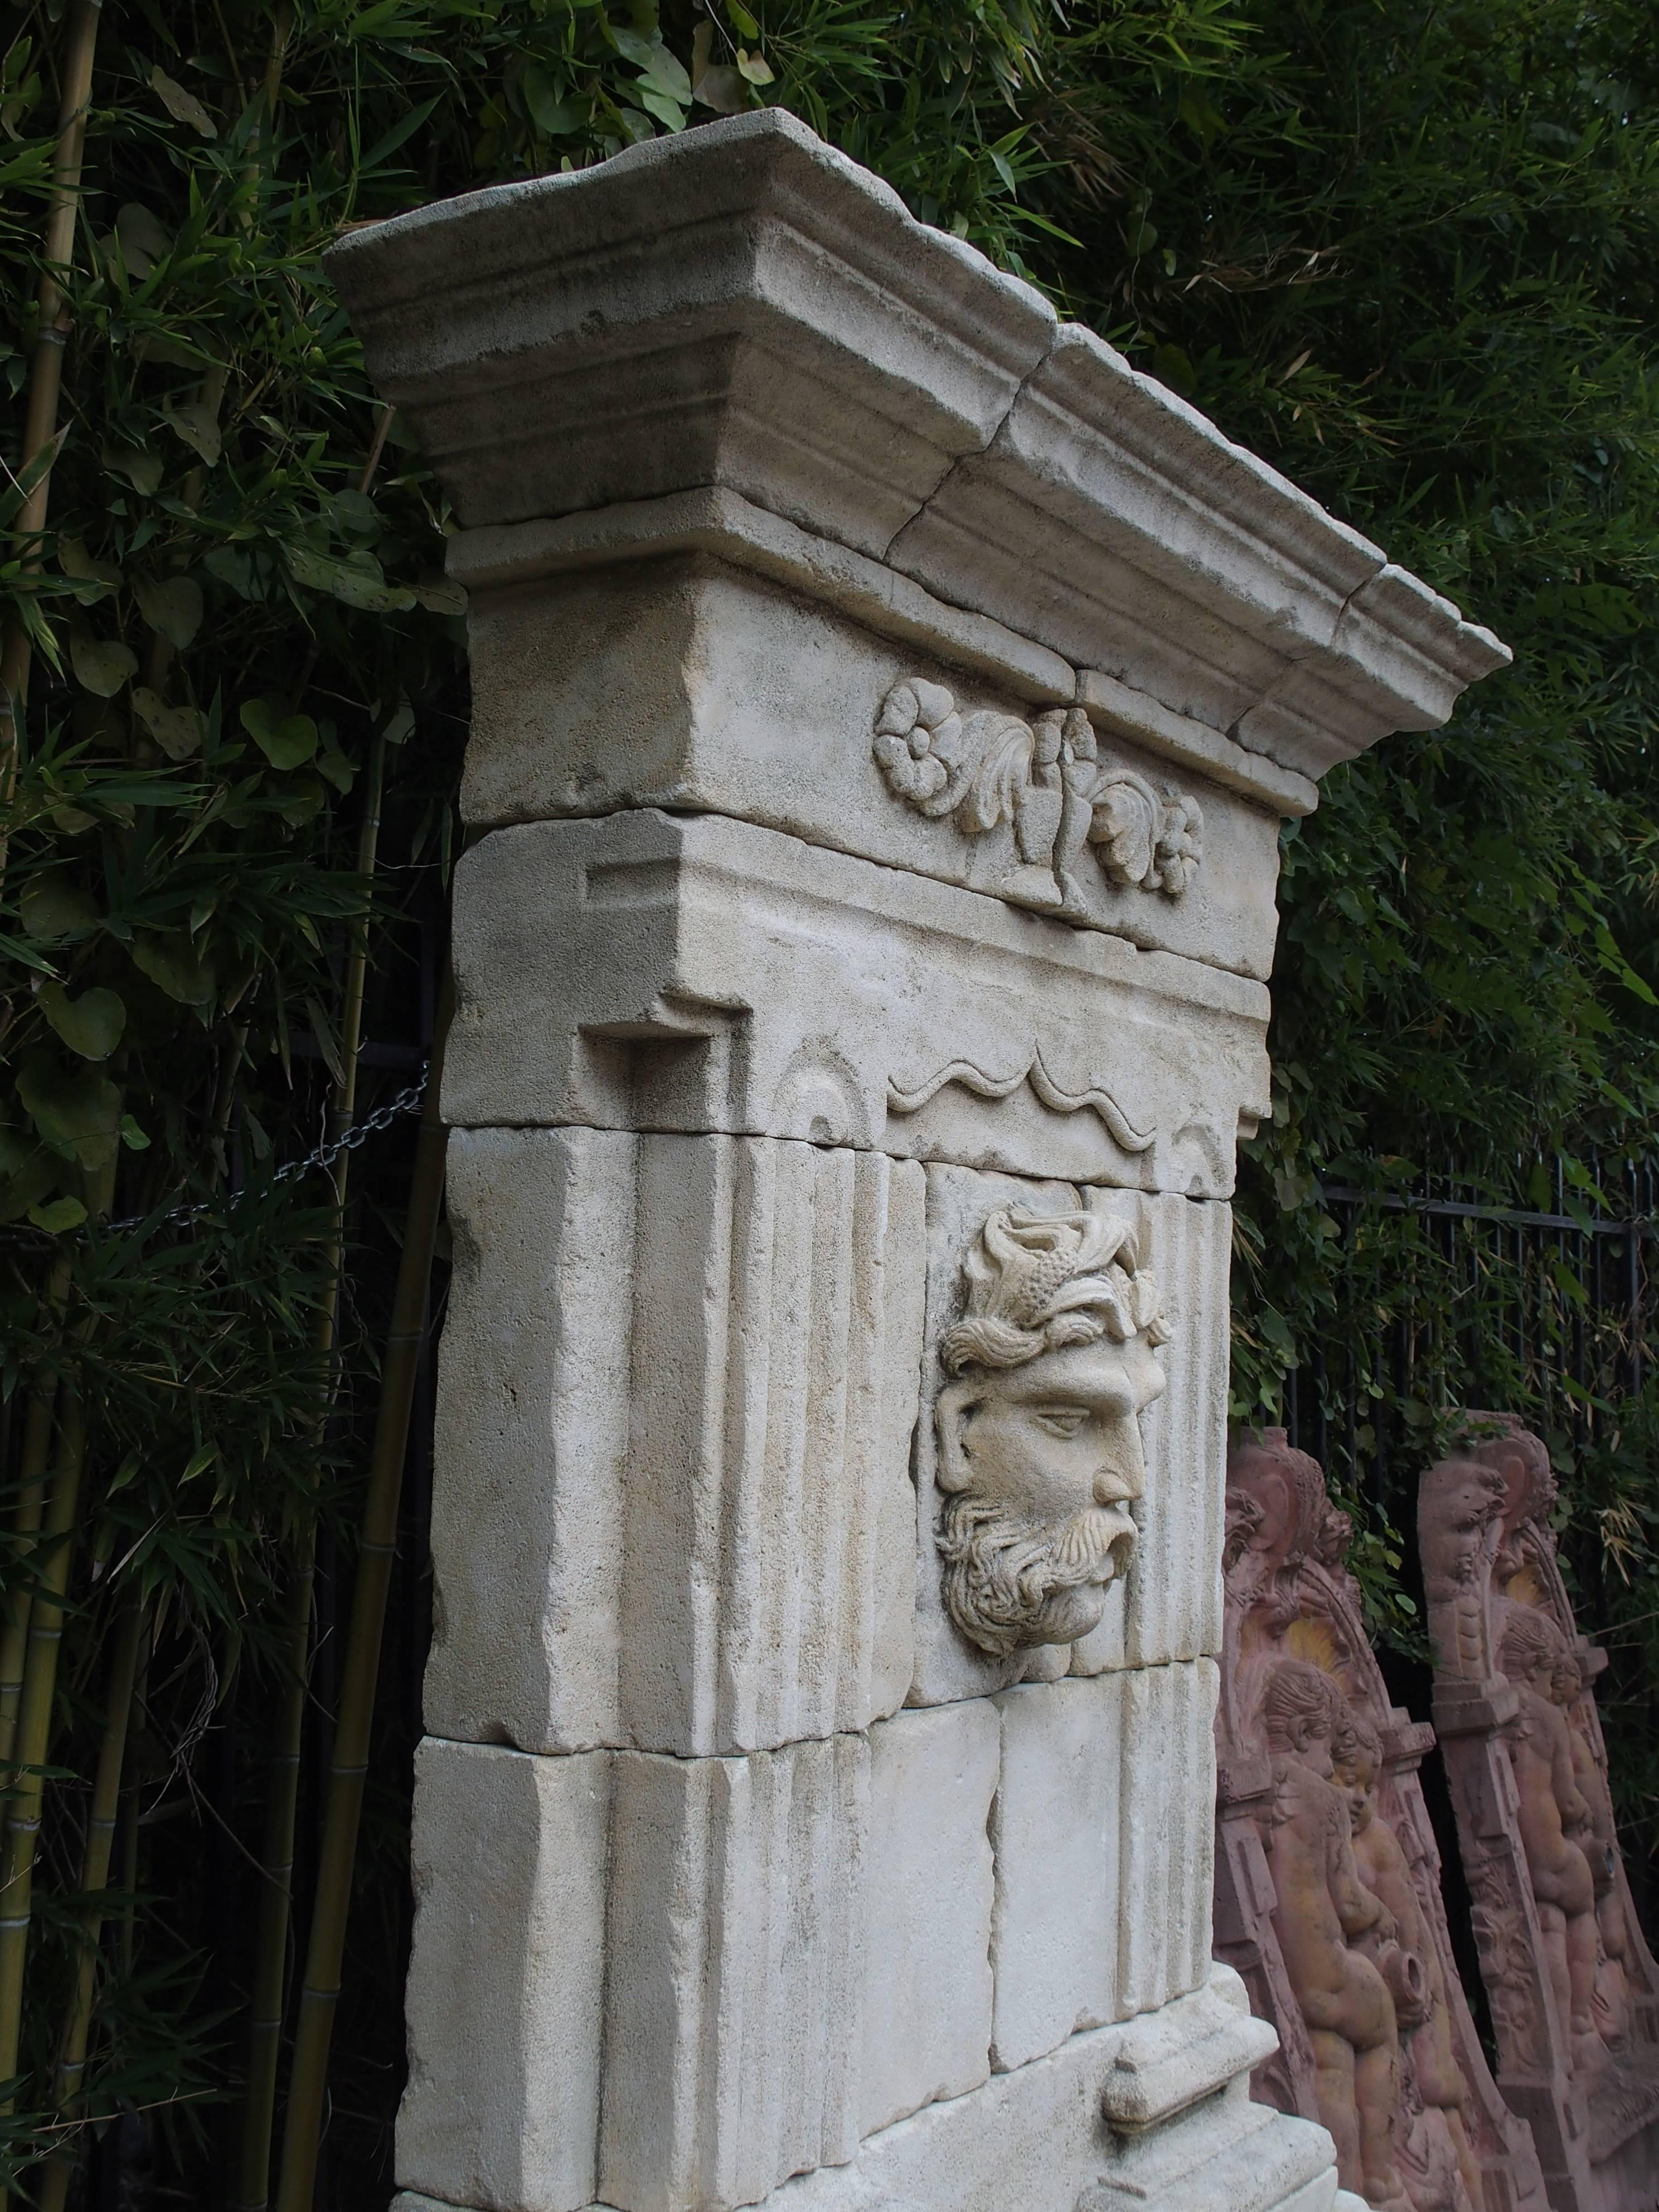 This towering wall fountain is part of our our imported limestone collection from France. Each of these fountains is hand-carved, never cast. They are based on the traditional 17th, 18th and 19th century French garden ornaments. Since each is hand